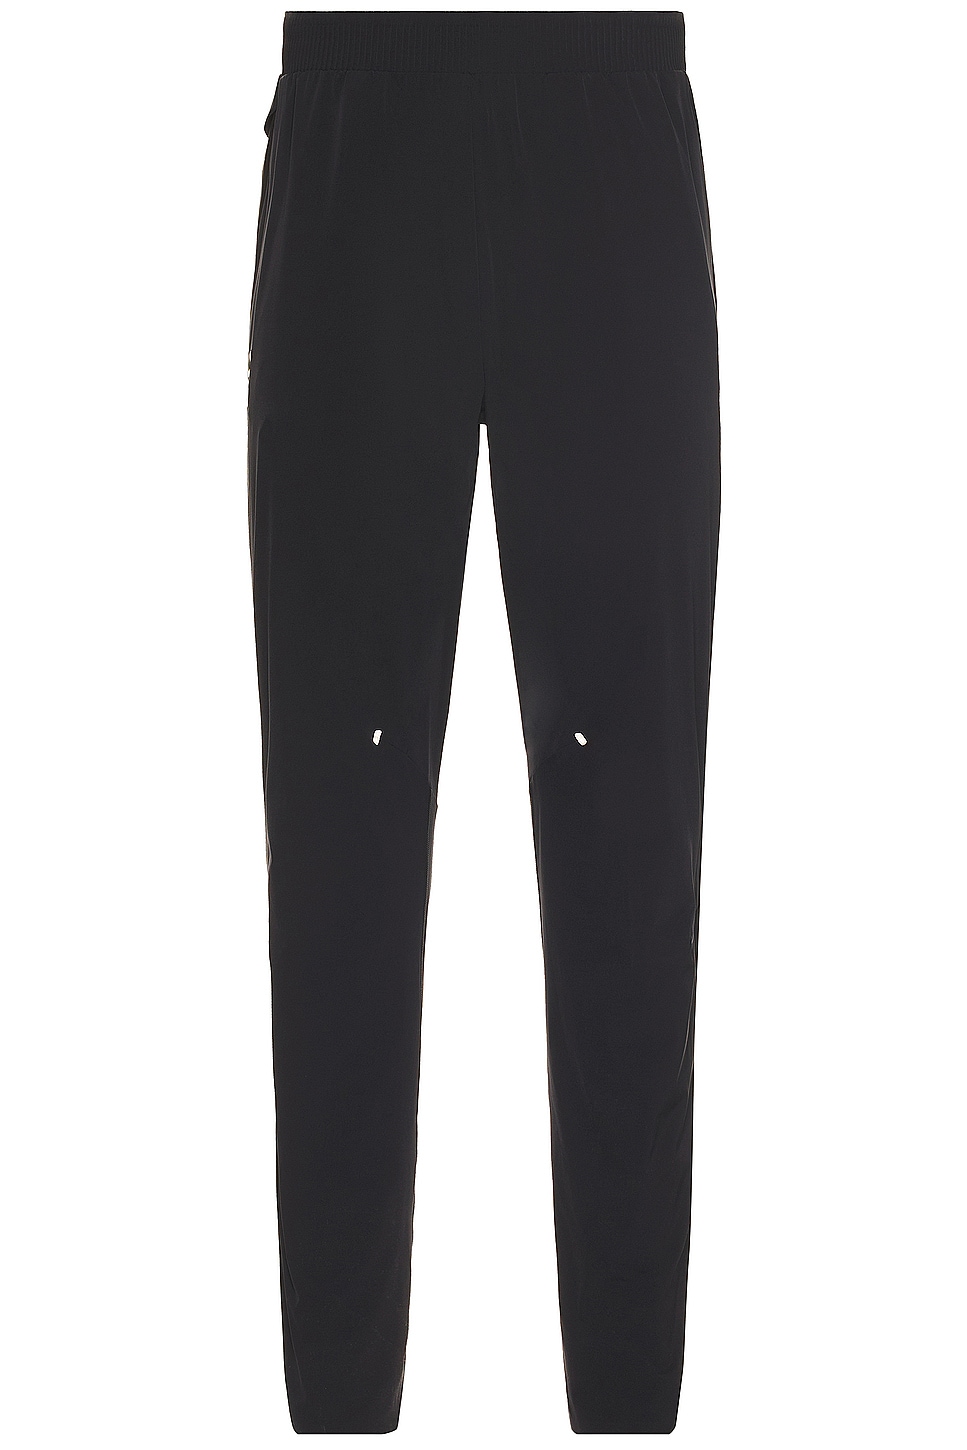 Image 1 of On Movement Pants in Black